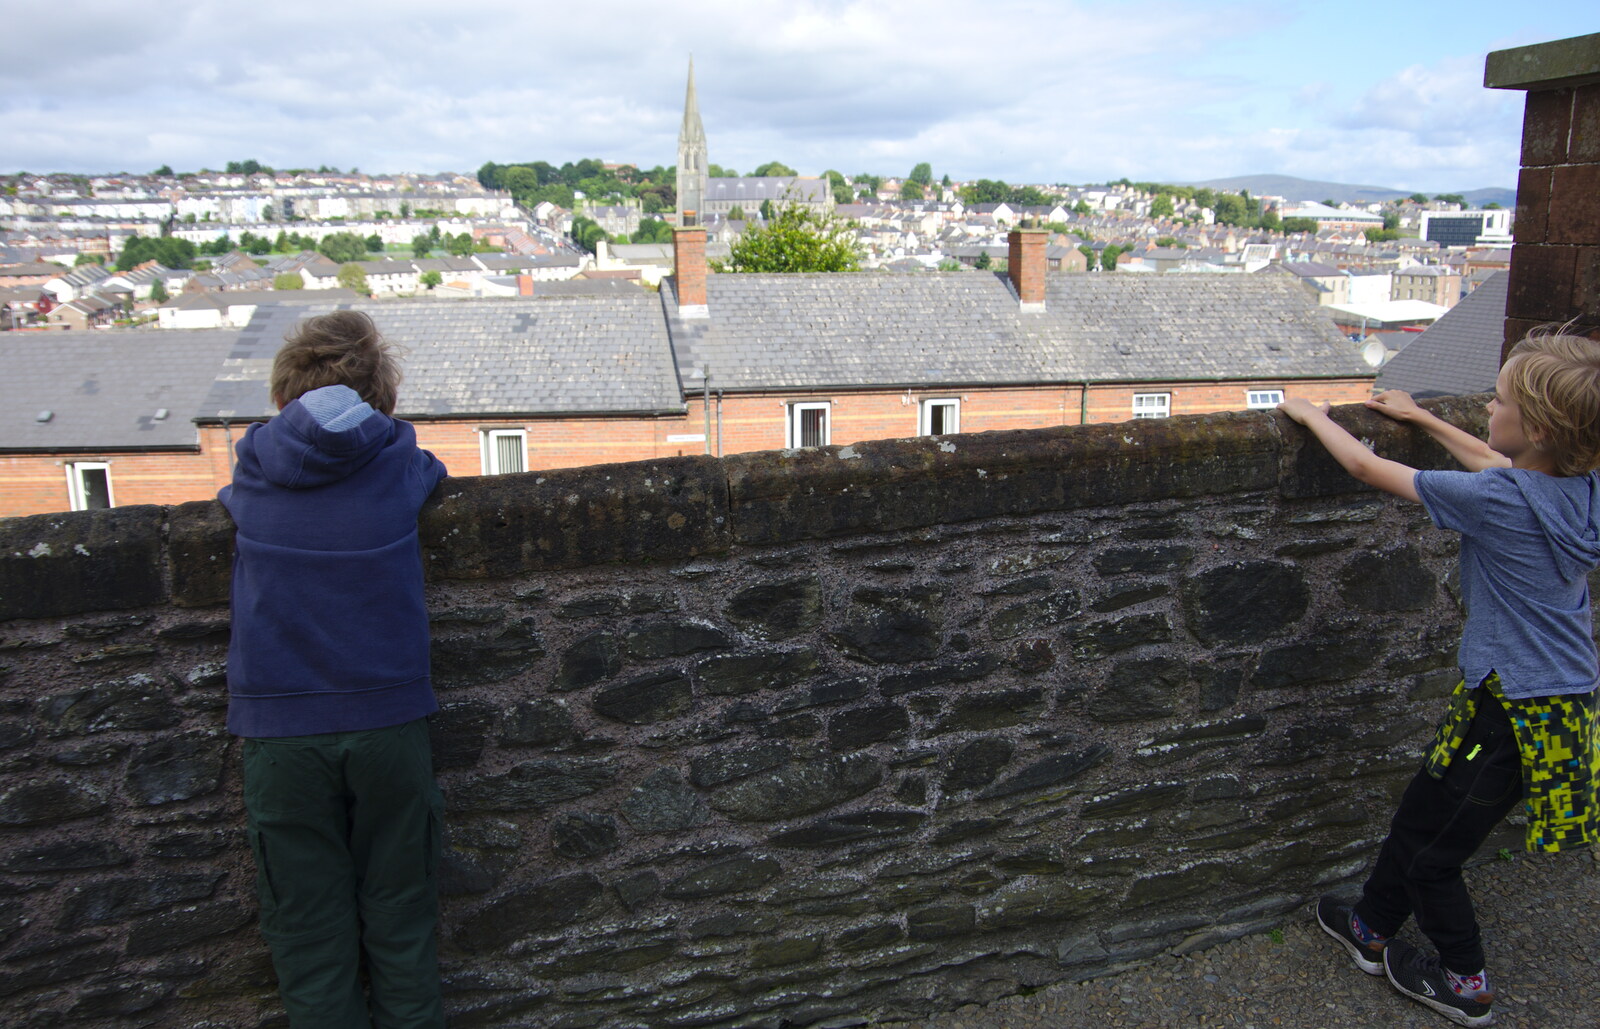 Fred and Harry look out over the walls from A Day in Derry, County Londonderry, Northern Ireland - 15th August 2019